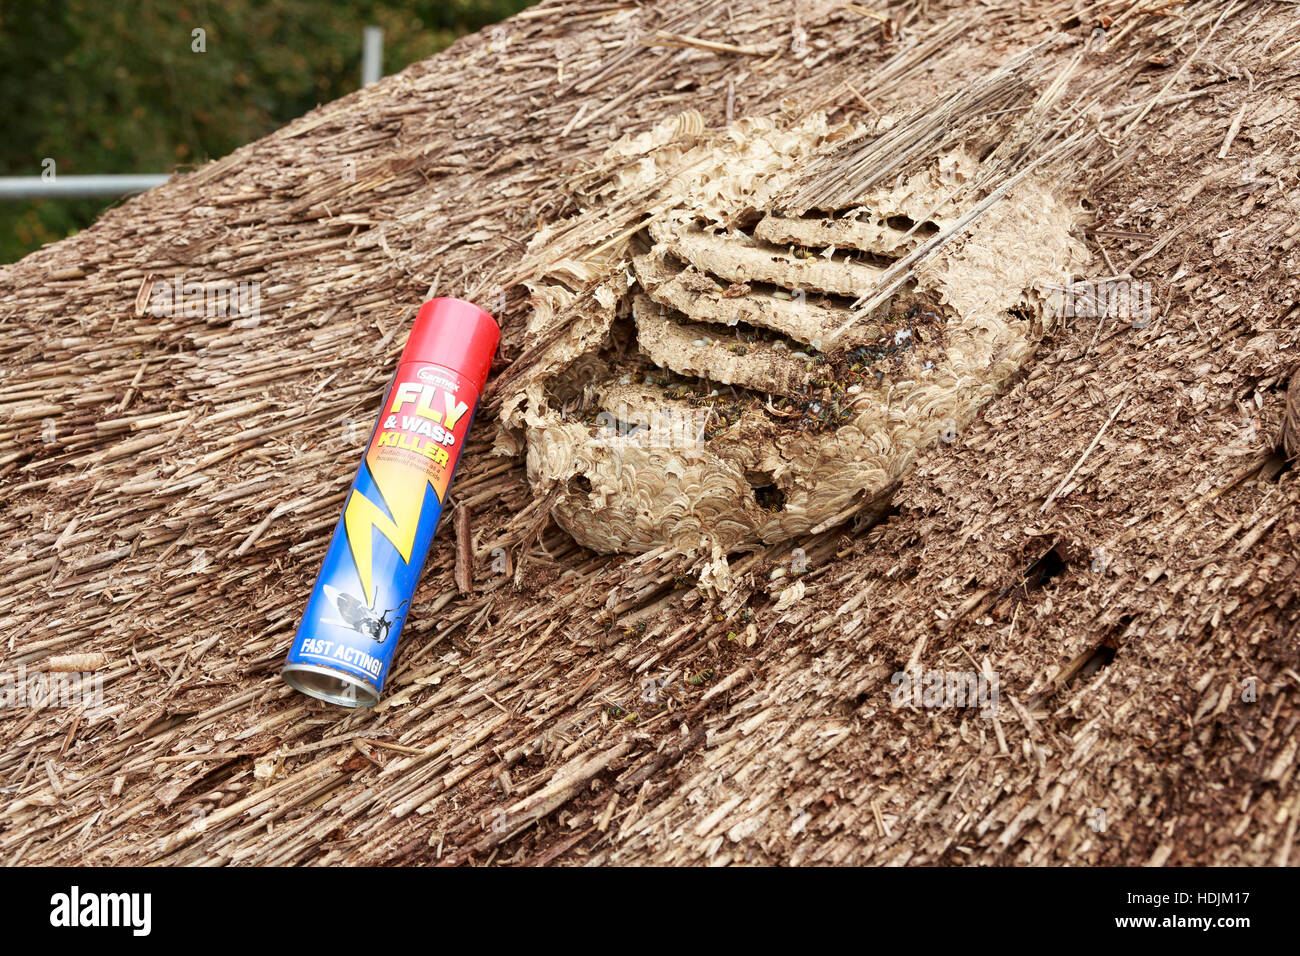 detail of wasps nest structure in thatched roof pest control with dead wasps and grubs Stock Photo